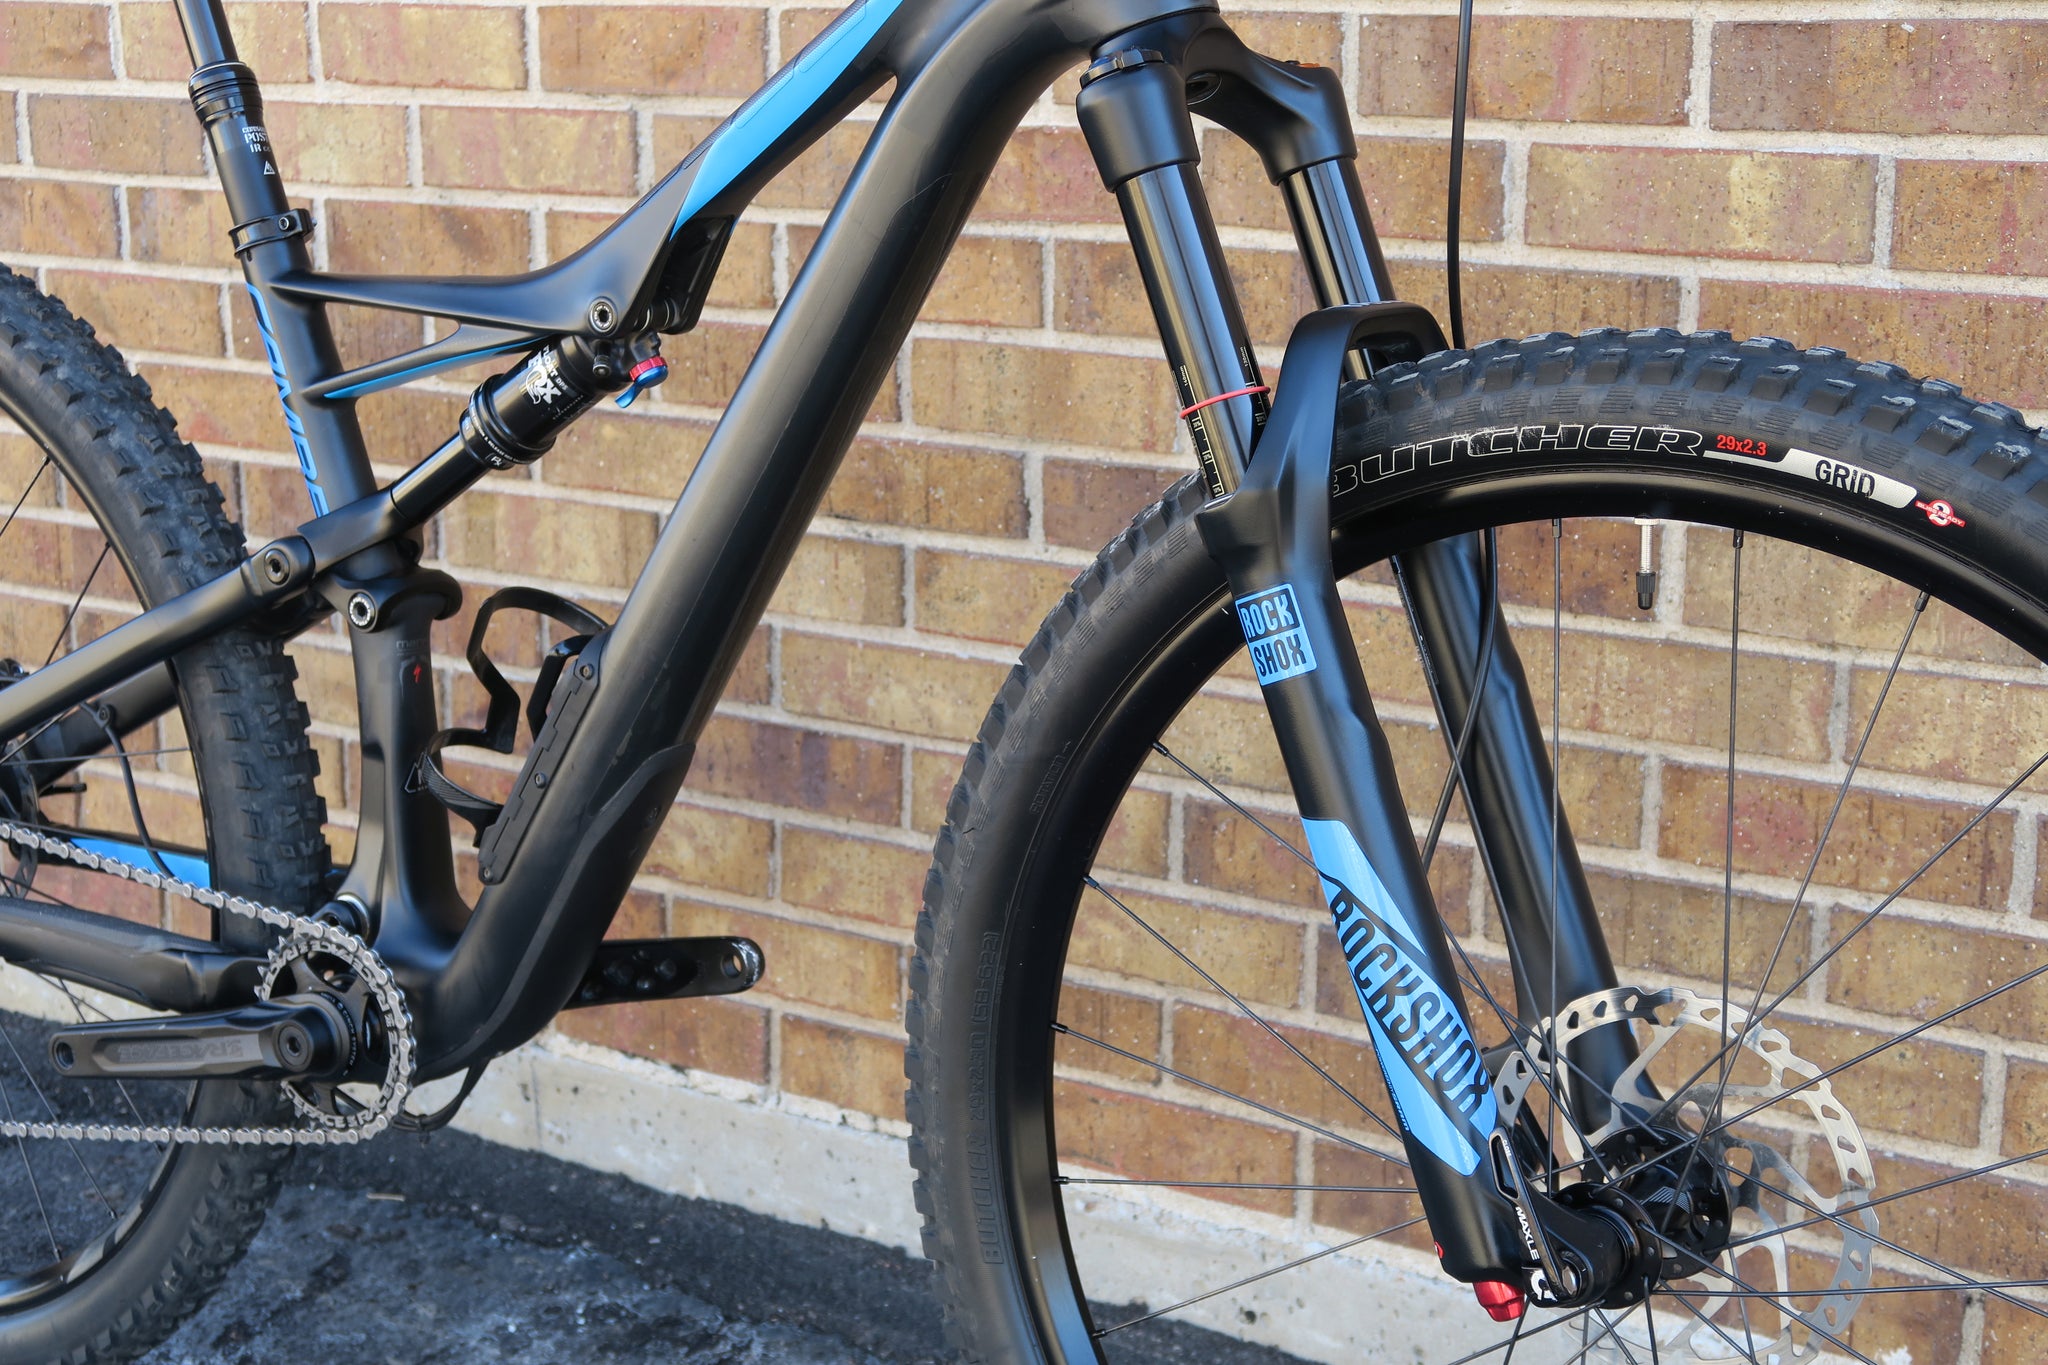 specialized camber fsr comp 29 2017